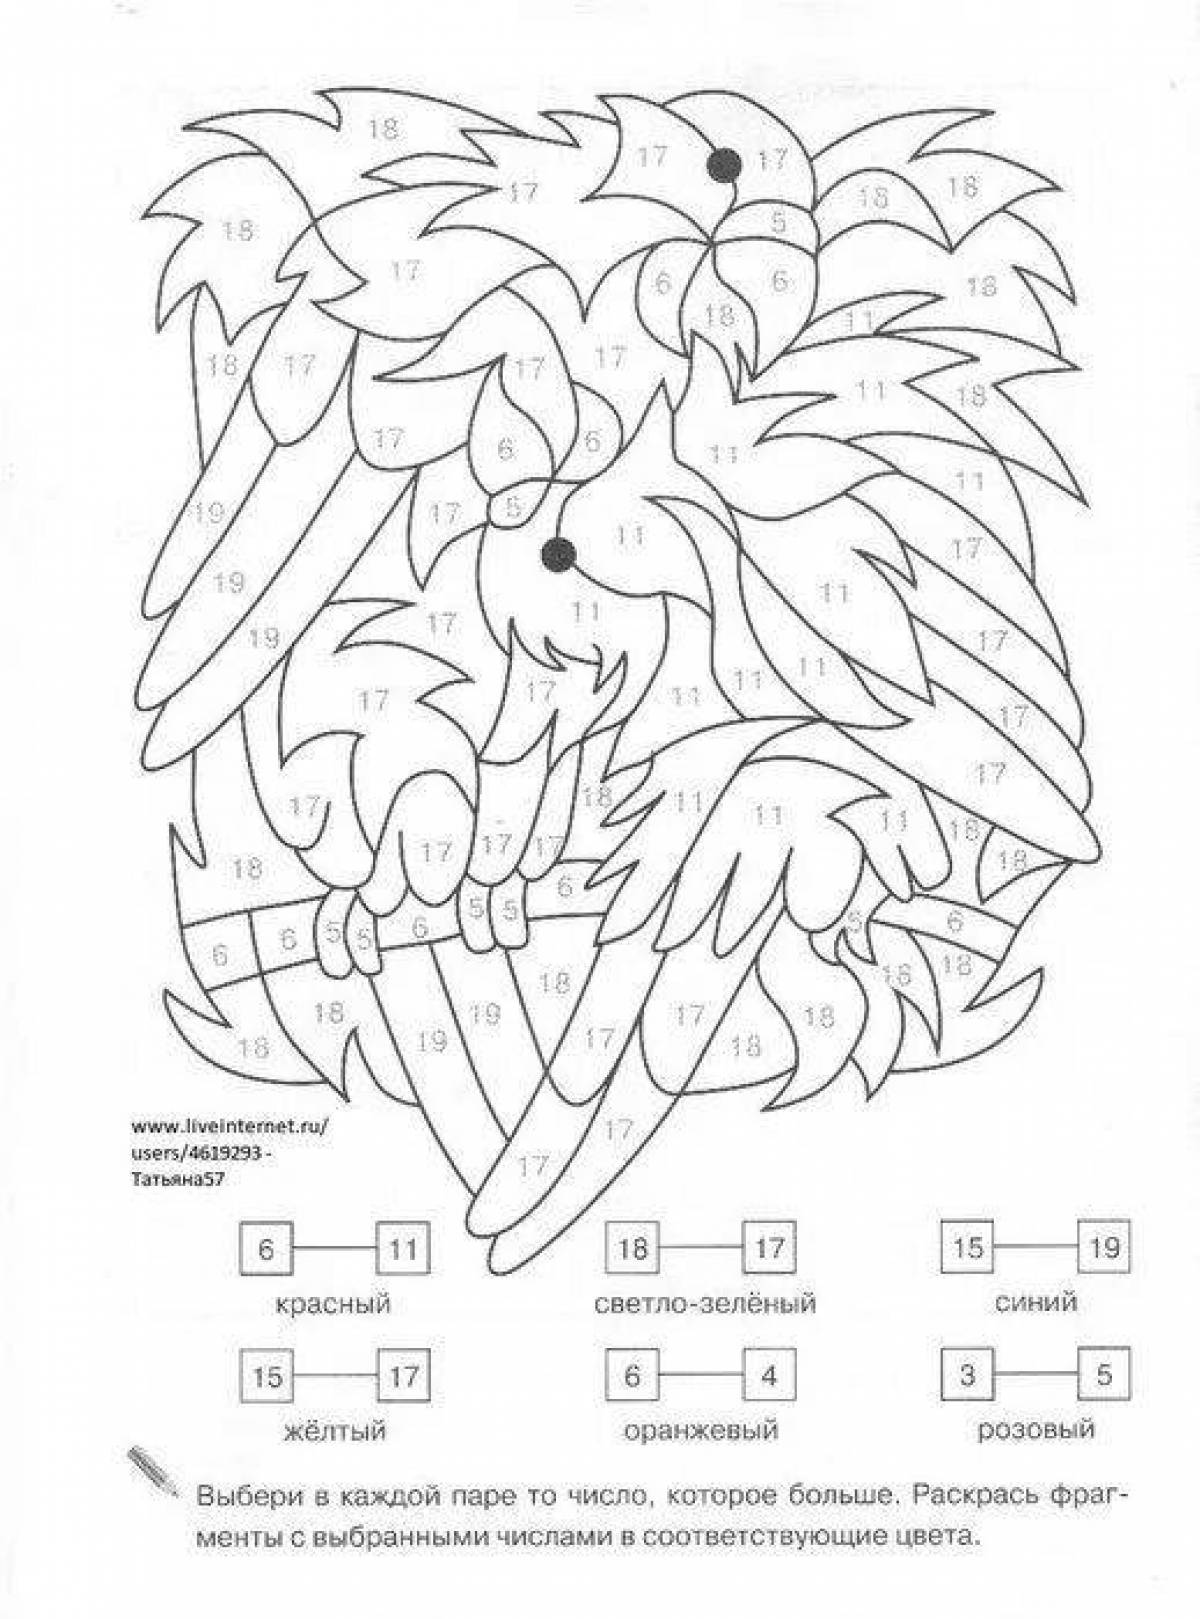 Bright score on coloring page 20